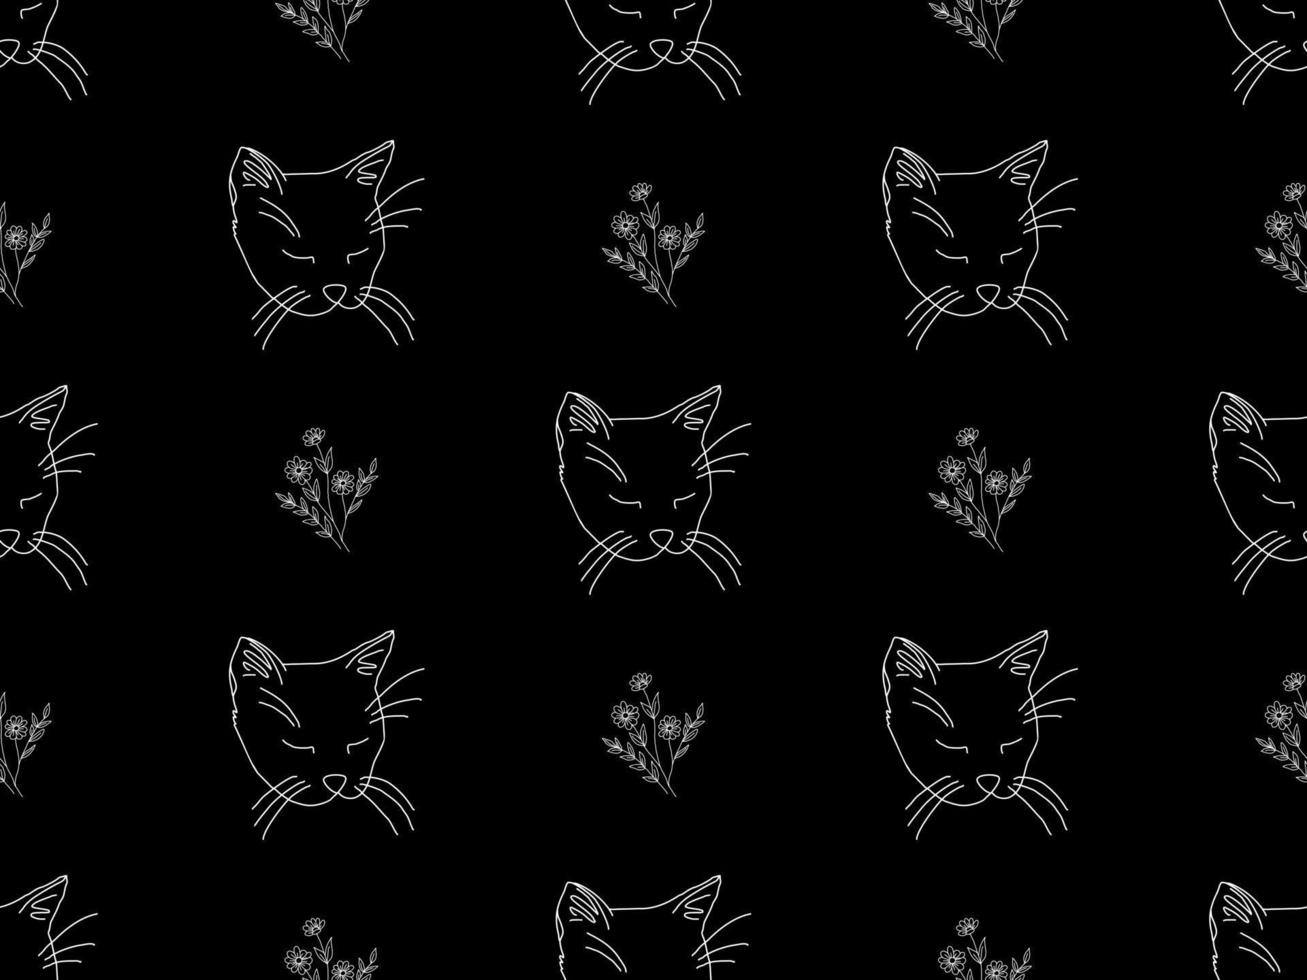 Cat cartoon character seamless pattern on black background vector